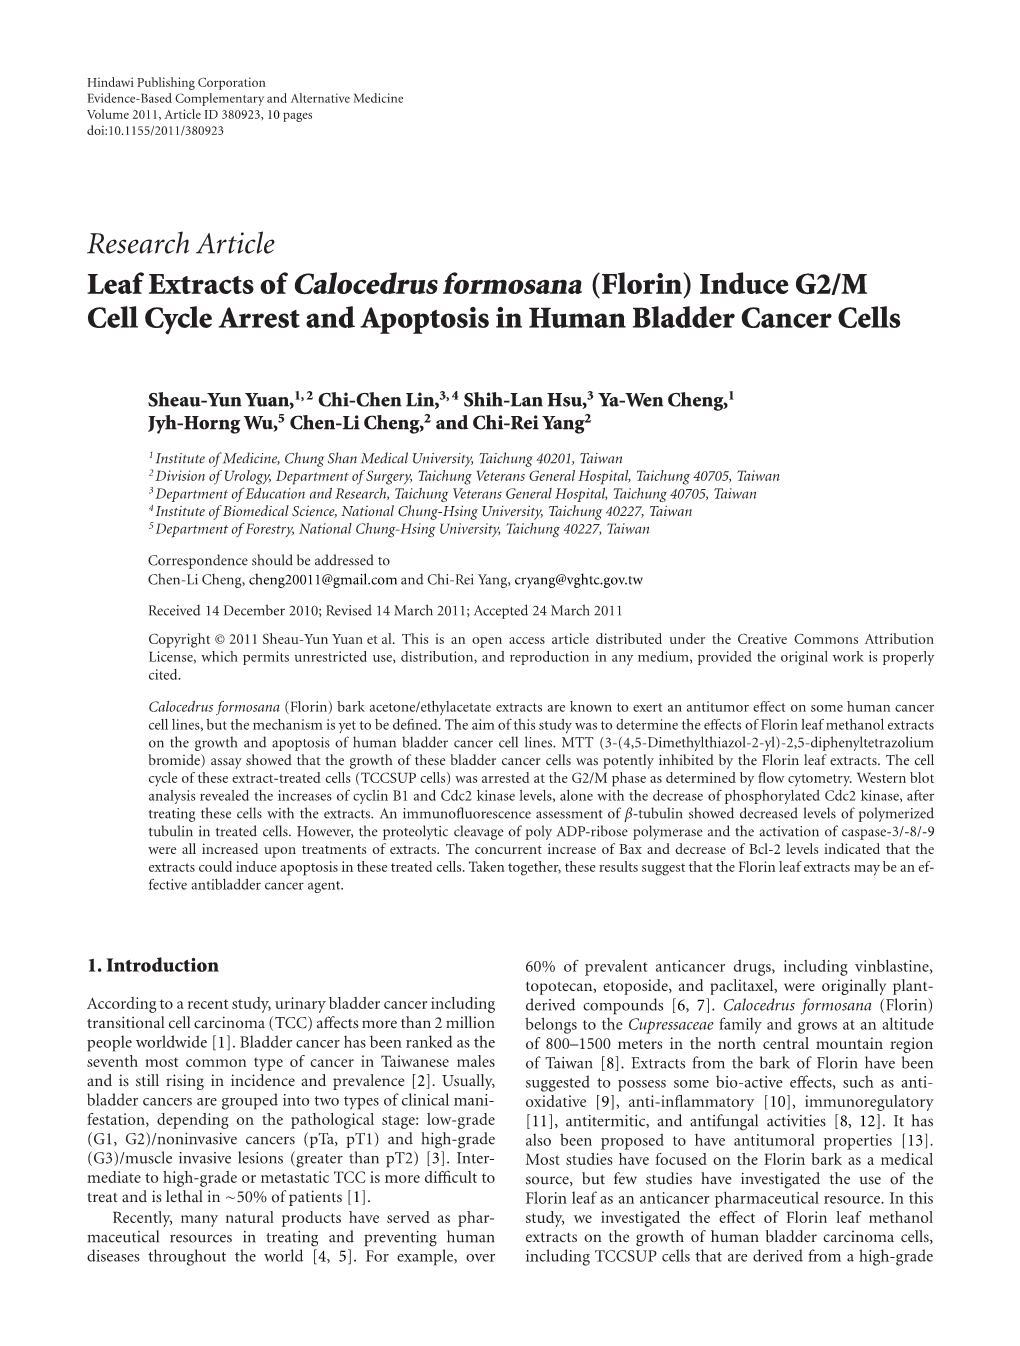 Leaf Extracts of Calocedrus Formosana (Florin) Induce G2/M Cell Cycle Arrest and Apoptosis in Human Bladder Cancer Cells